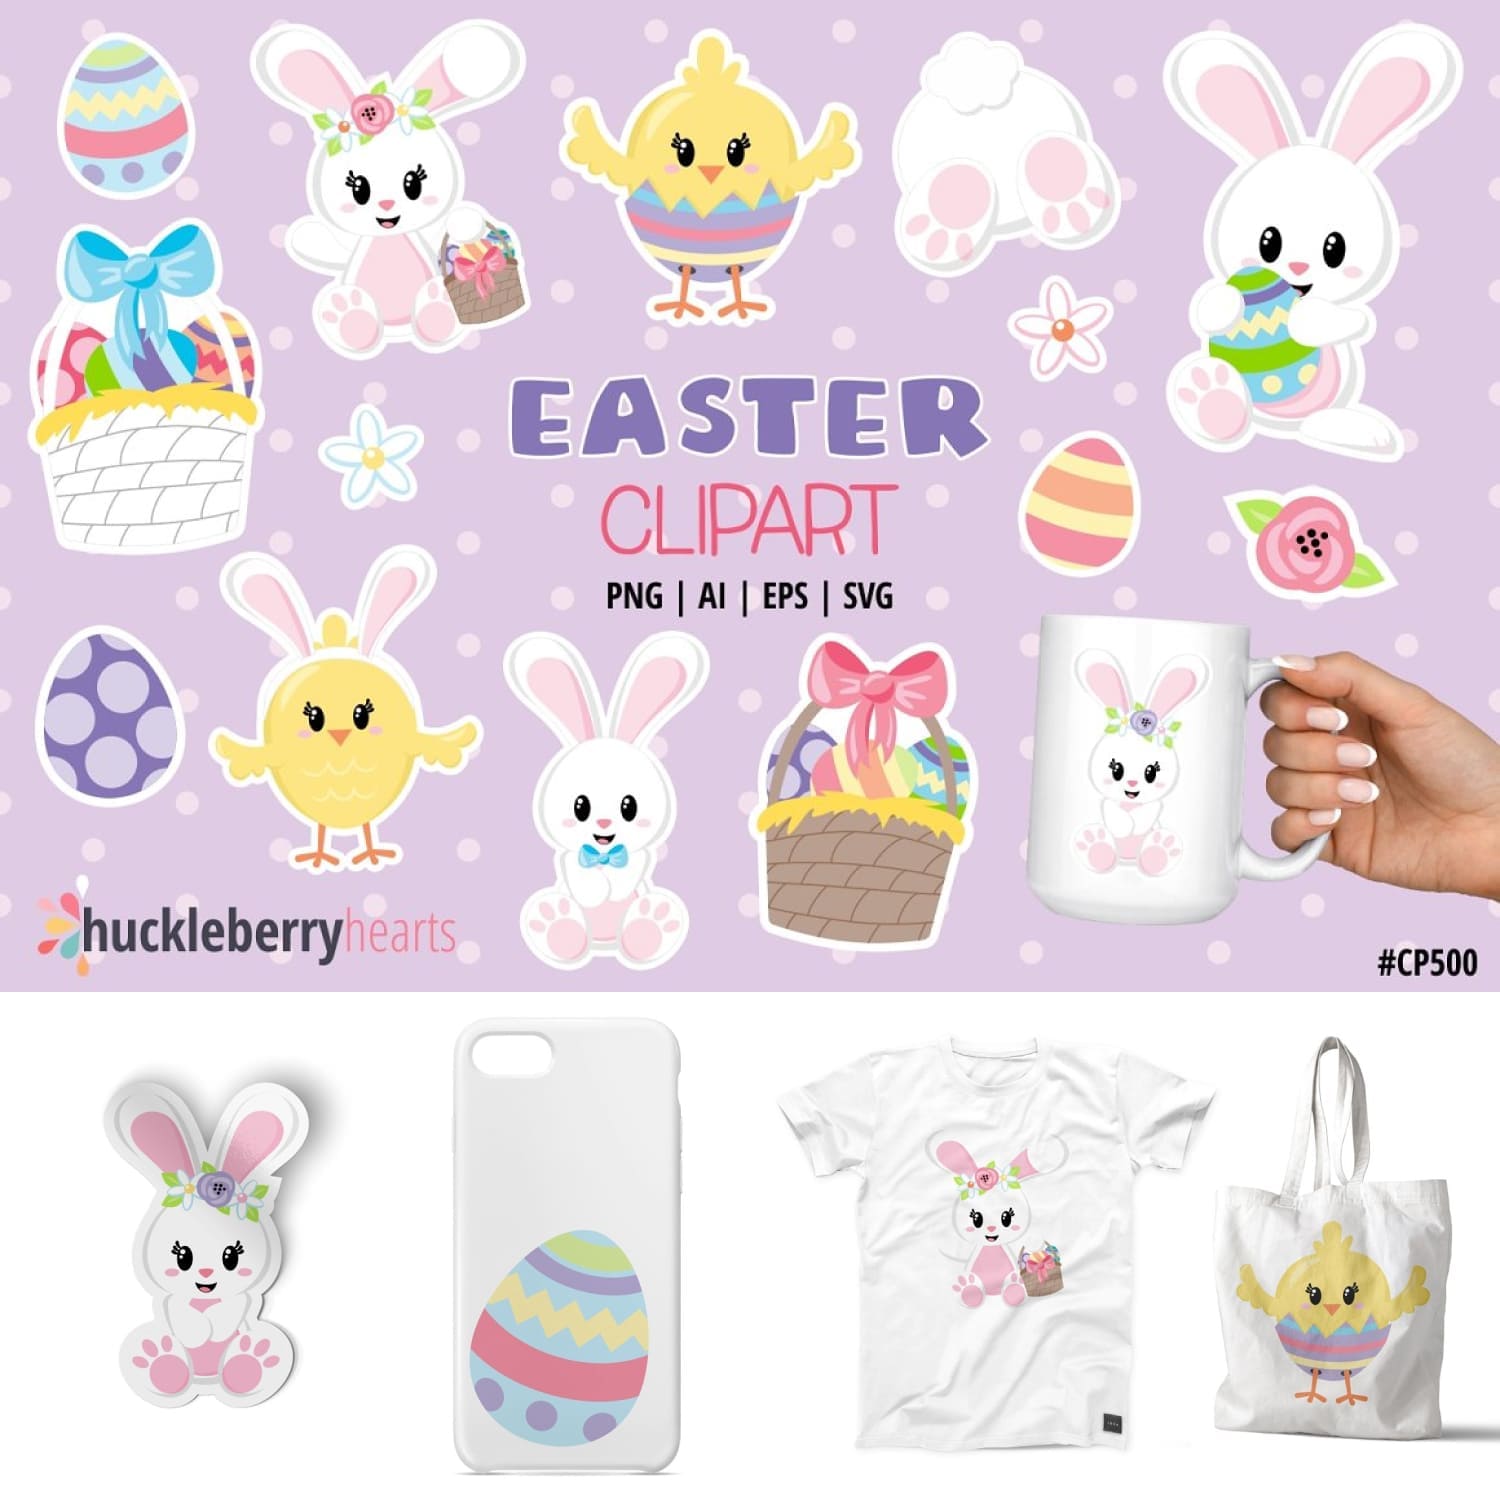 Easter Clipart White Bunnies - main image preview.